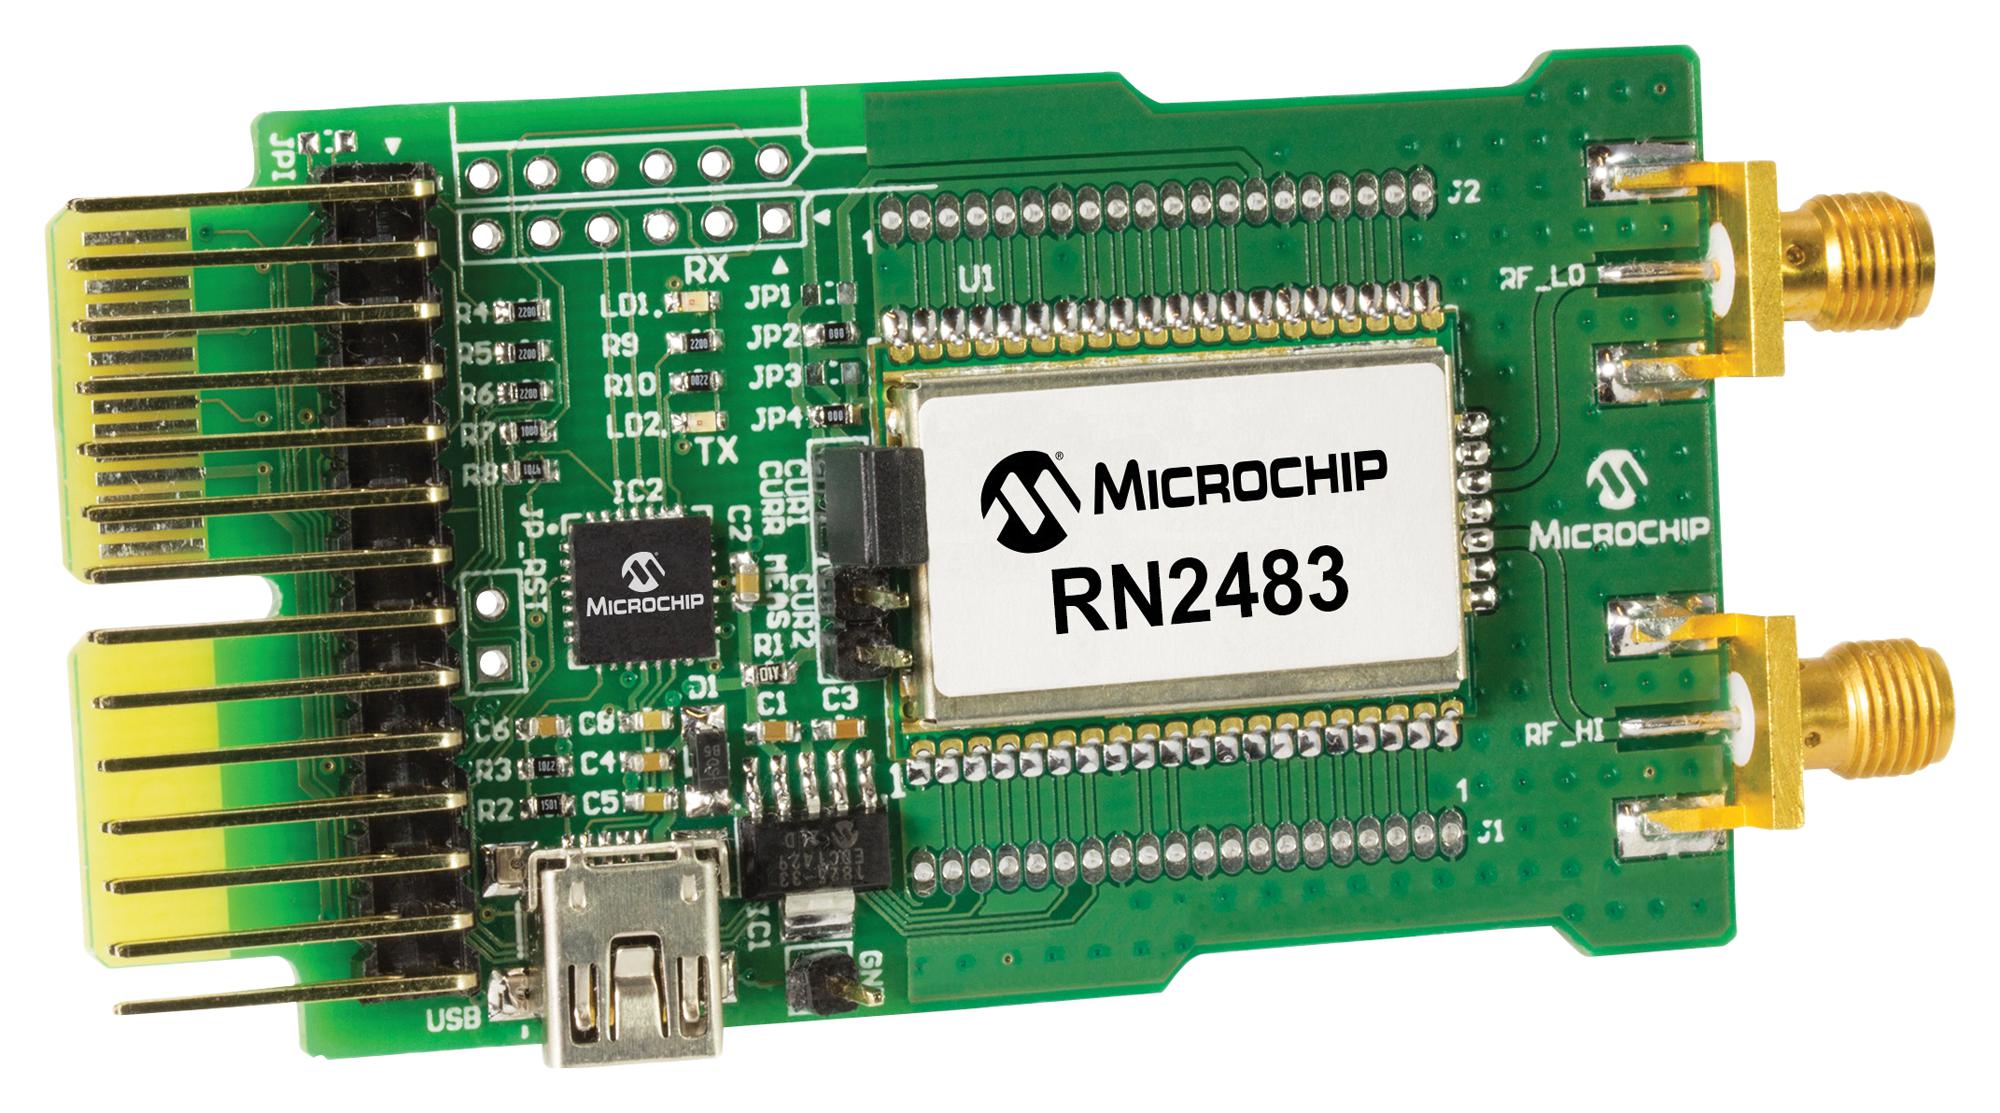 MICROCHIP Daughter Boards / Modules RN-2483-PICTAIL DAUGHTER BOARD, RN2483 LORA TRANSCEIVER MICROCHIP 2499795 RN-2483-PICTAIL